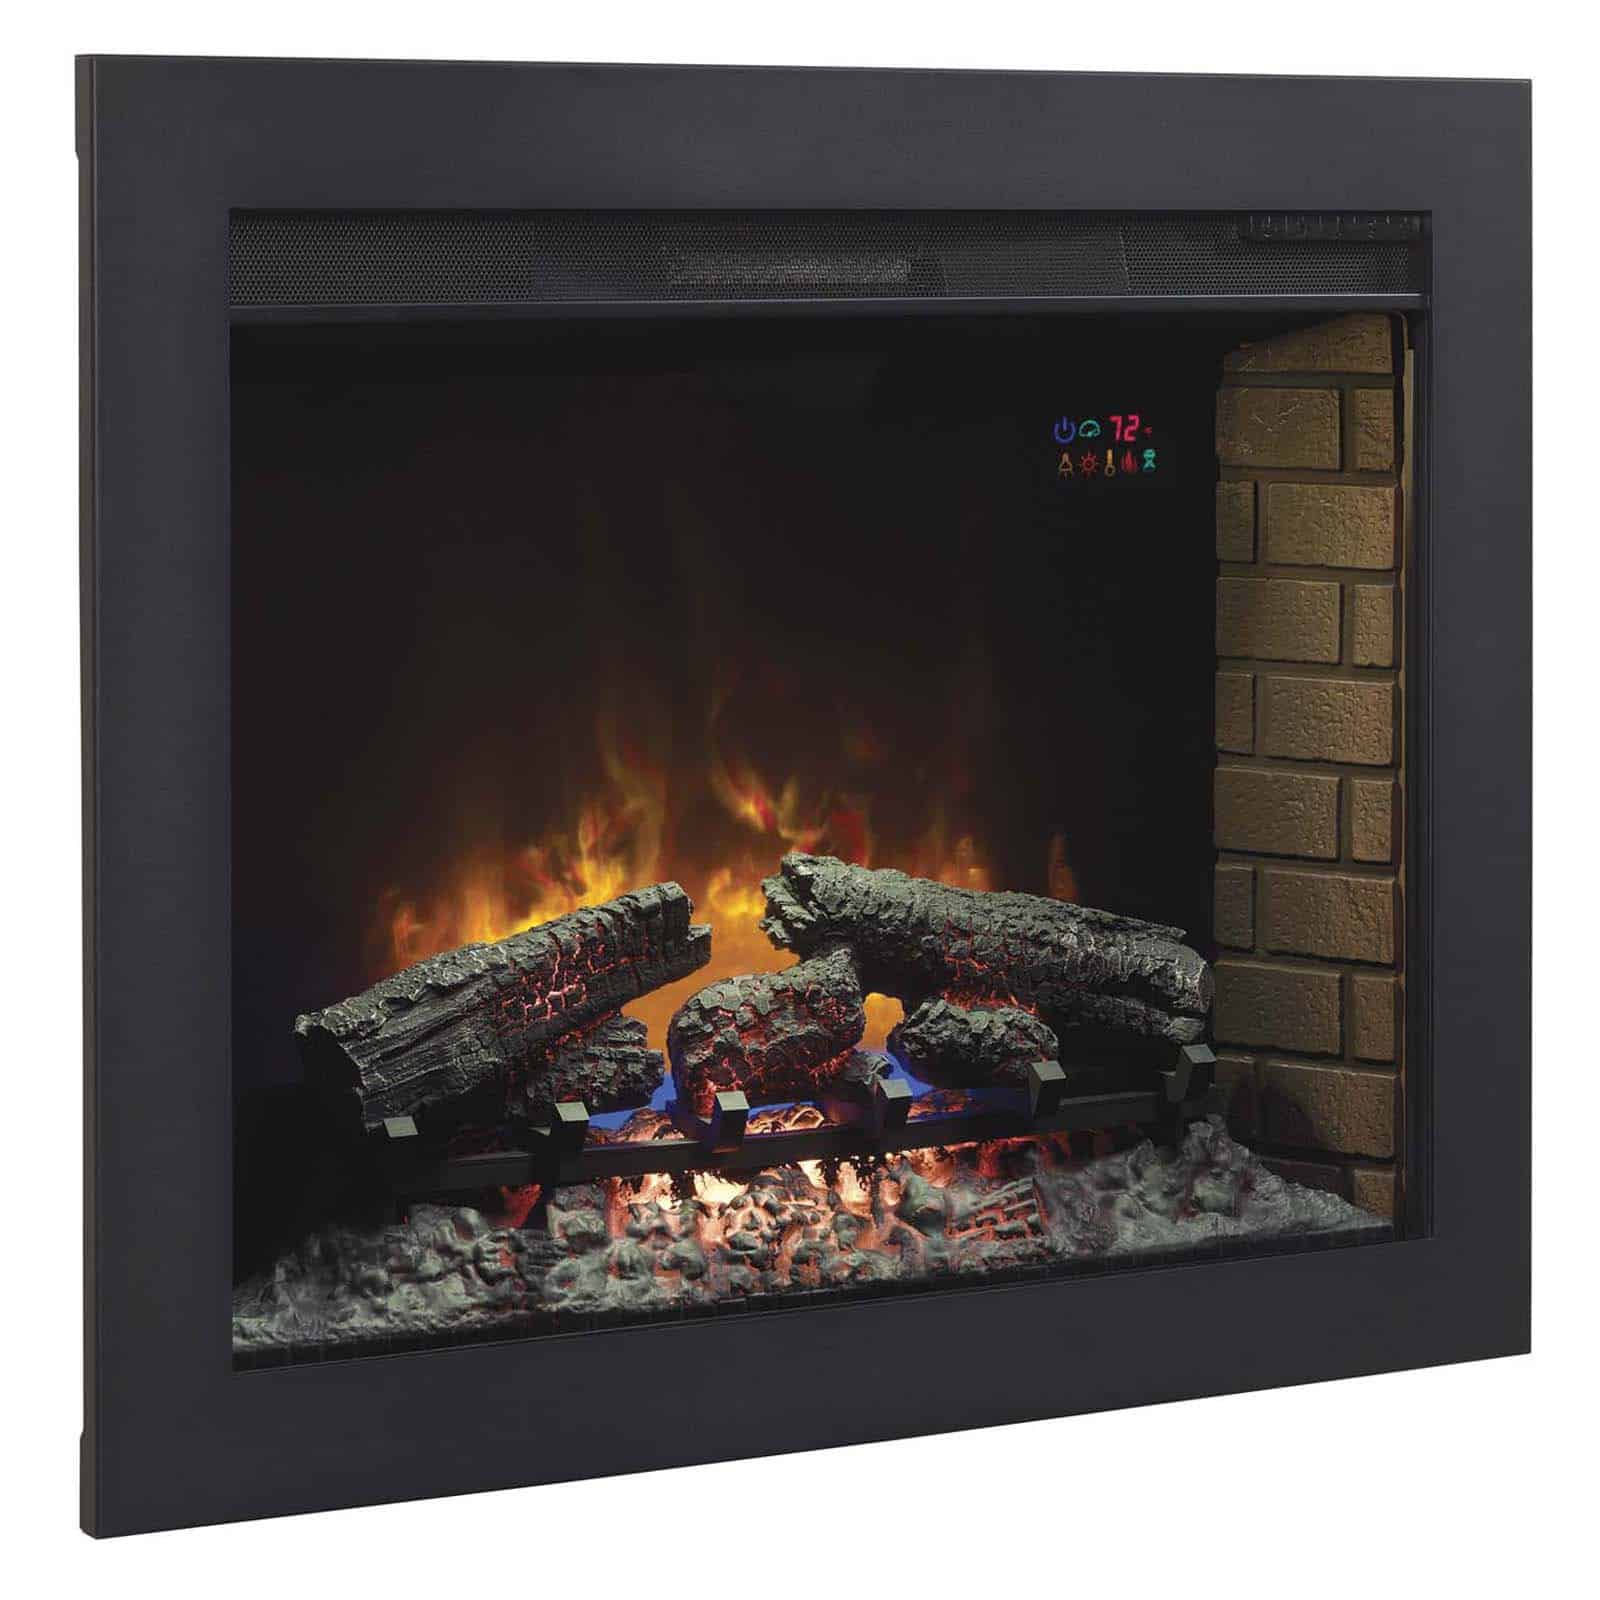 *DNP*33" FlushMount Trim Kit for use with InWall Electric Fireplace Insert